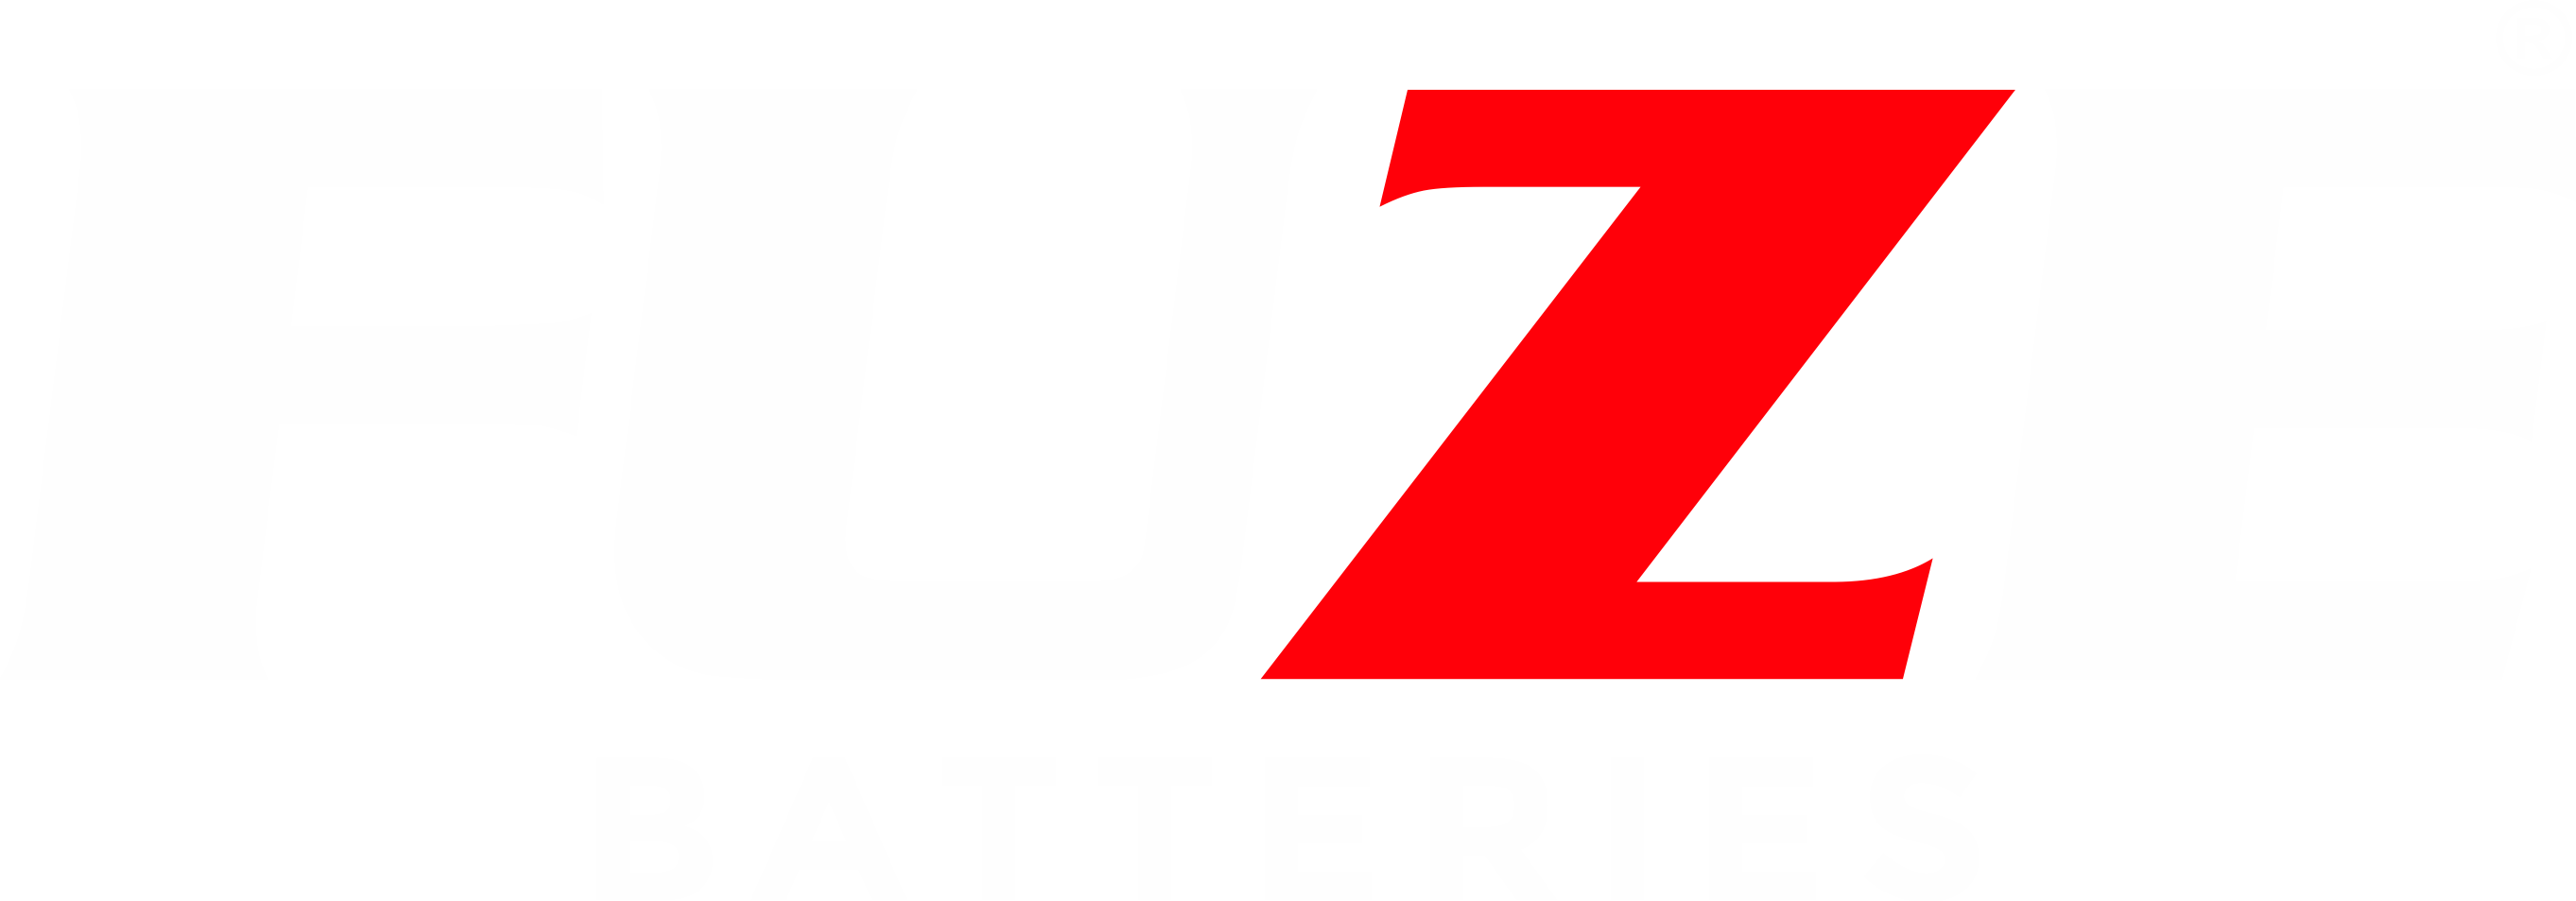 battery manufacture in india